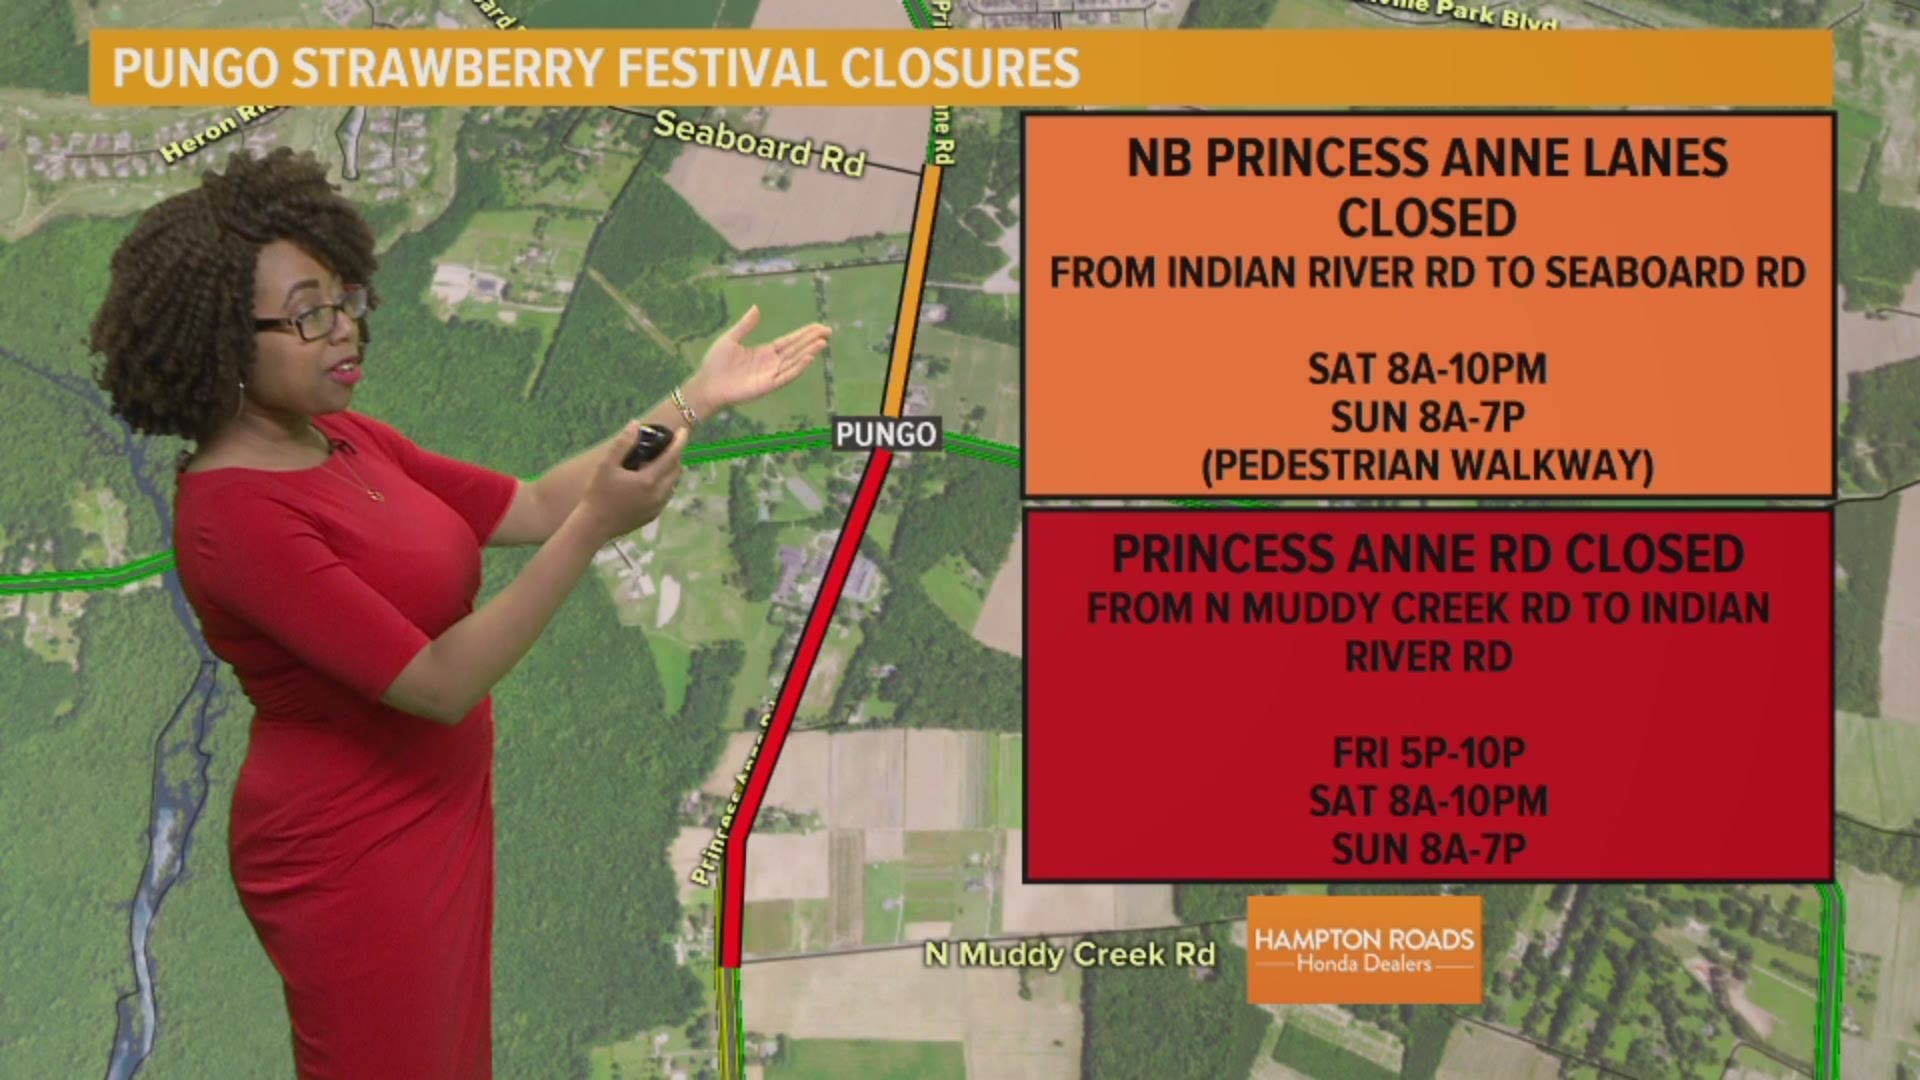 Be aware of the road closures at the Pungo Strawberry Festival this weekend.